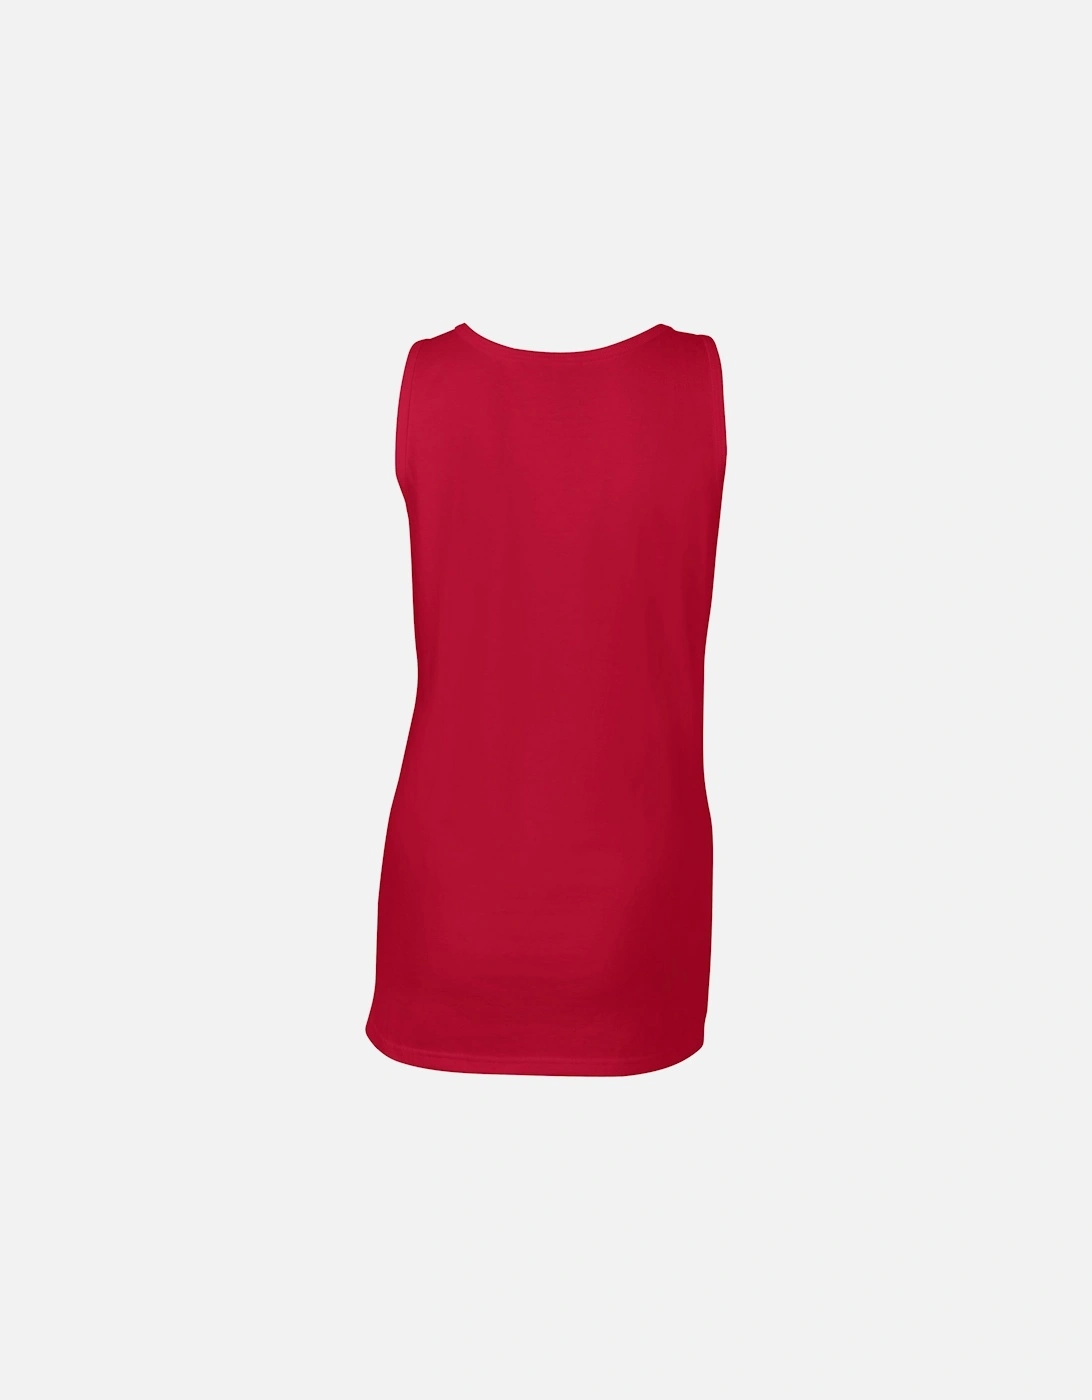 Womens/Ladies Softstyle Tank Top